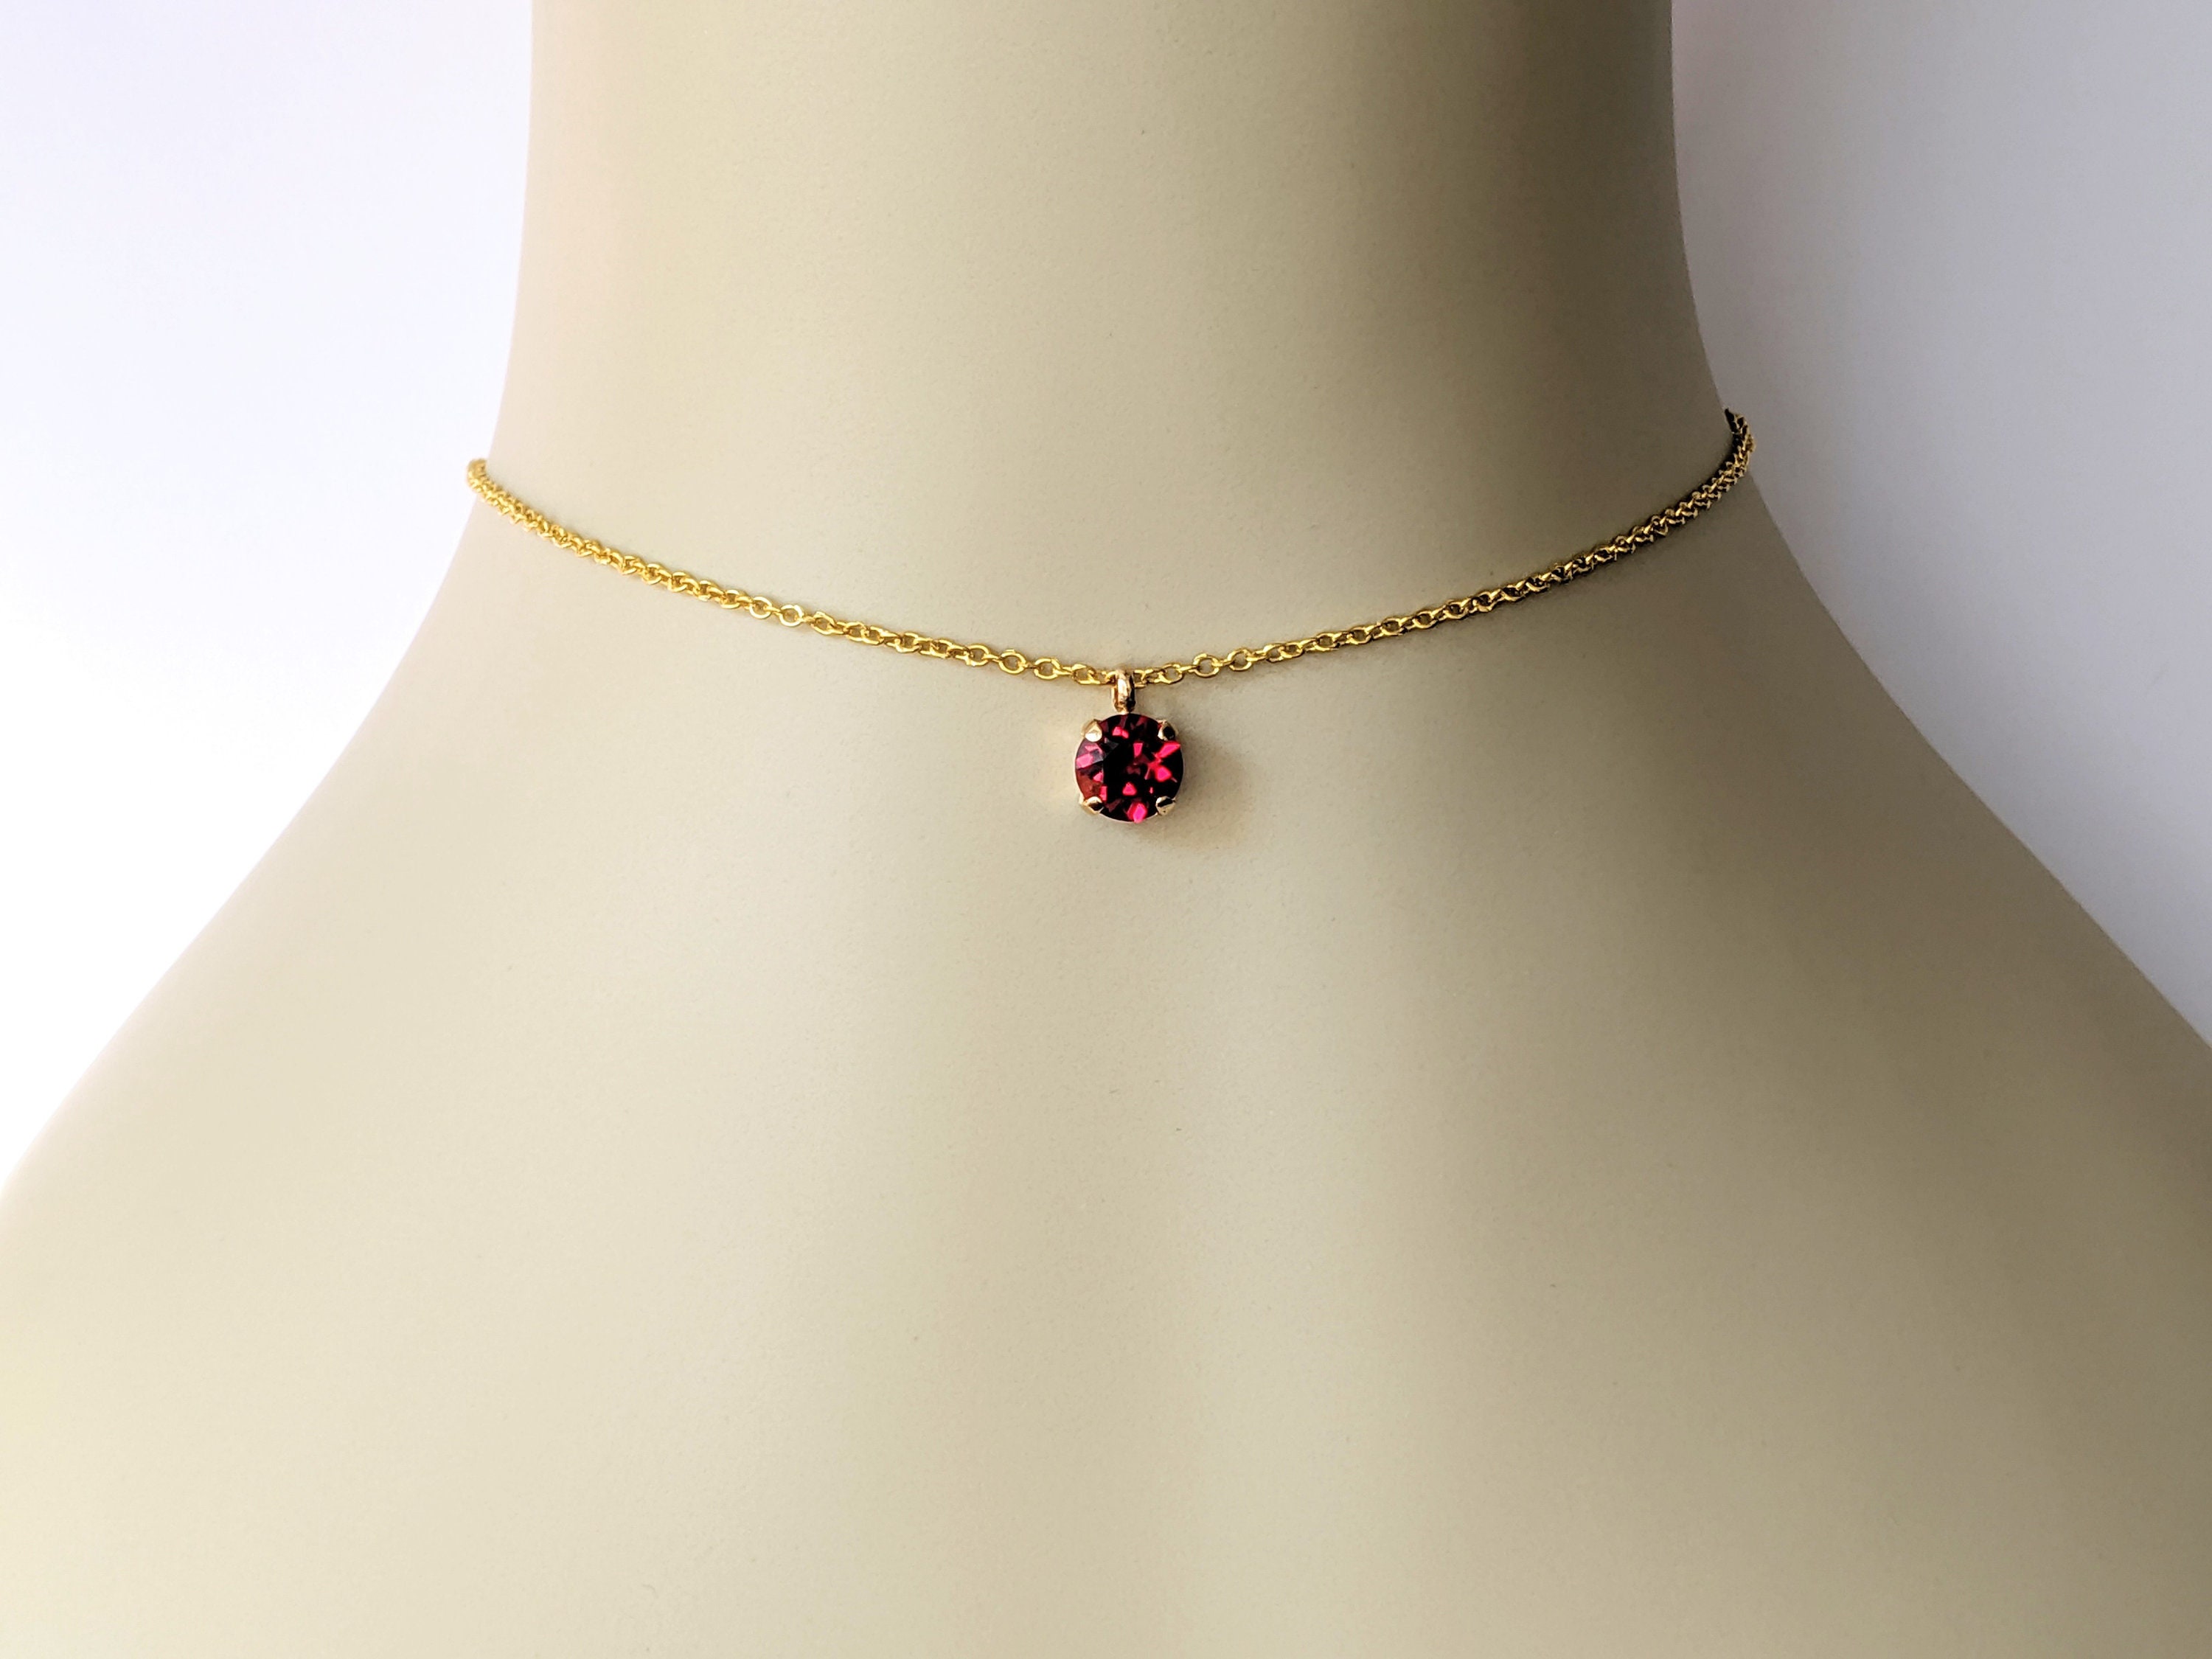 Diamond and Ruby Choker Necklace and Pendant Earrings - Moussaieff |  Moussaieff